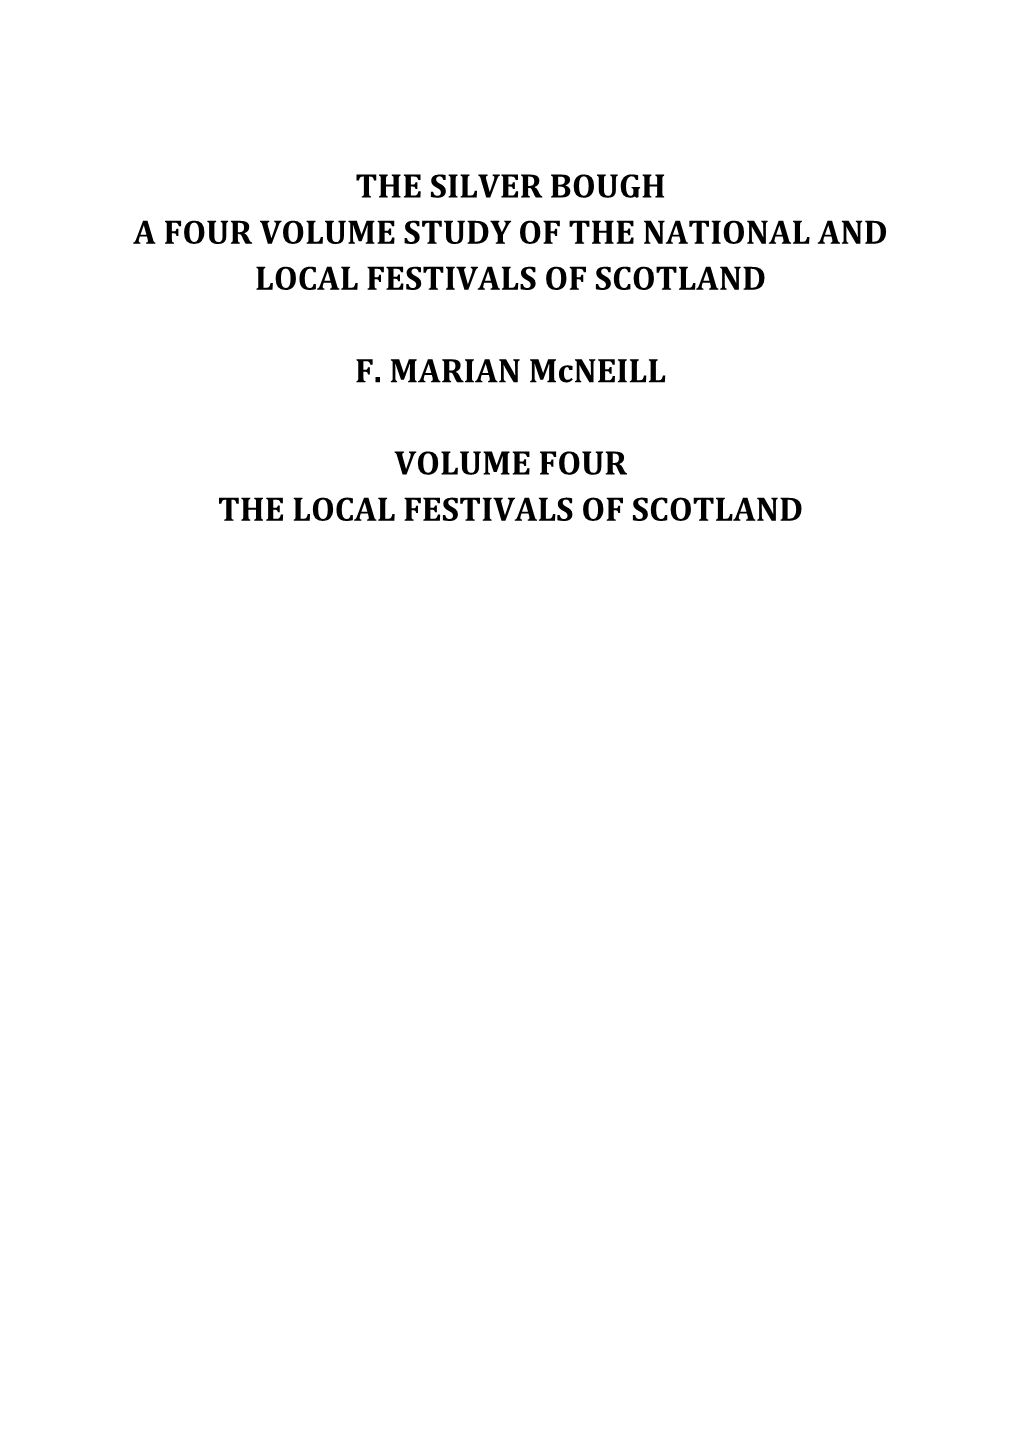 The Silver Bough a Four Volume Study of the National and Local Festivals of Scotland